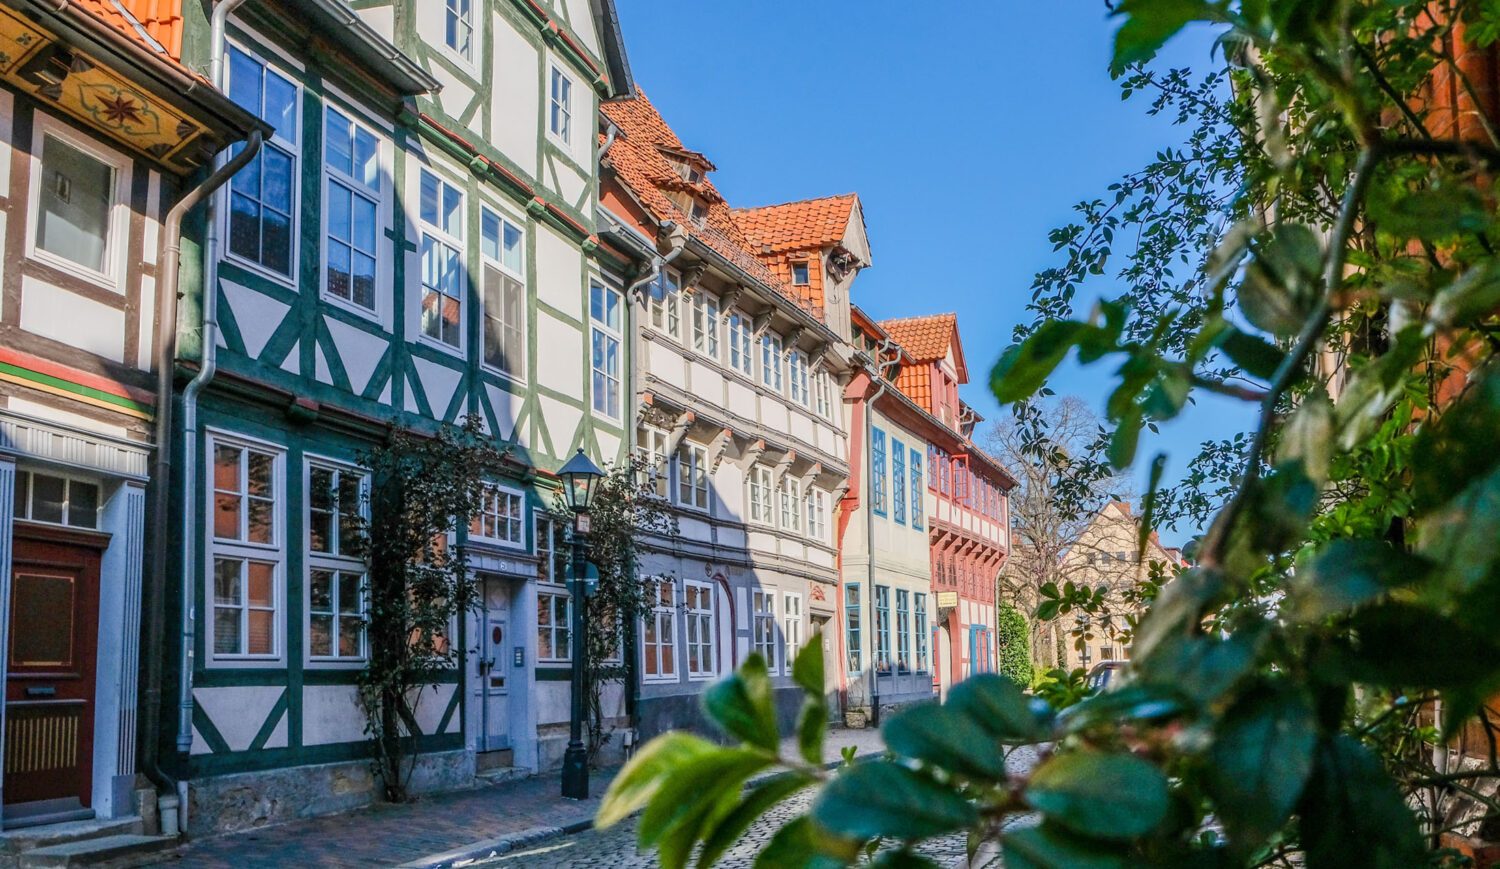 The old half-timbered quarter southeast of downtown Hildesheim gave you an impression of what the old bishop's town looked like in the Middle Ages © Hildesheim Marketing GmbH / Clemens Heidrich